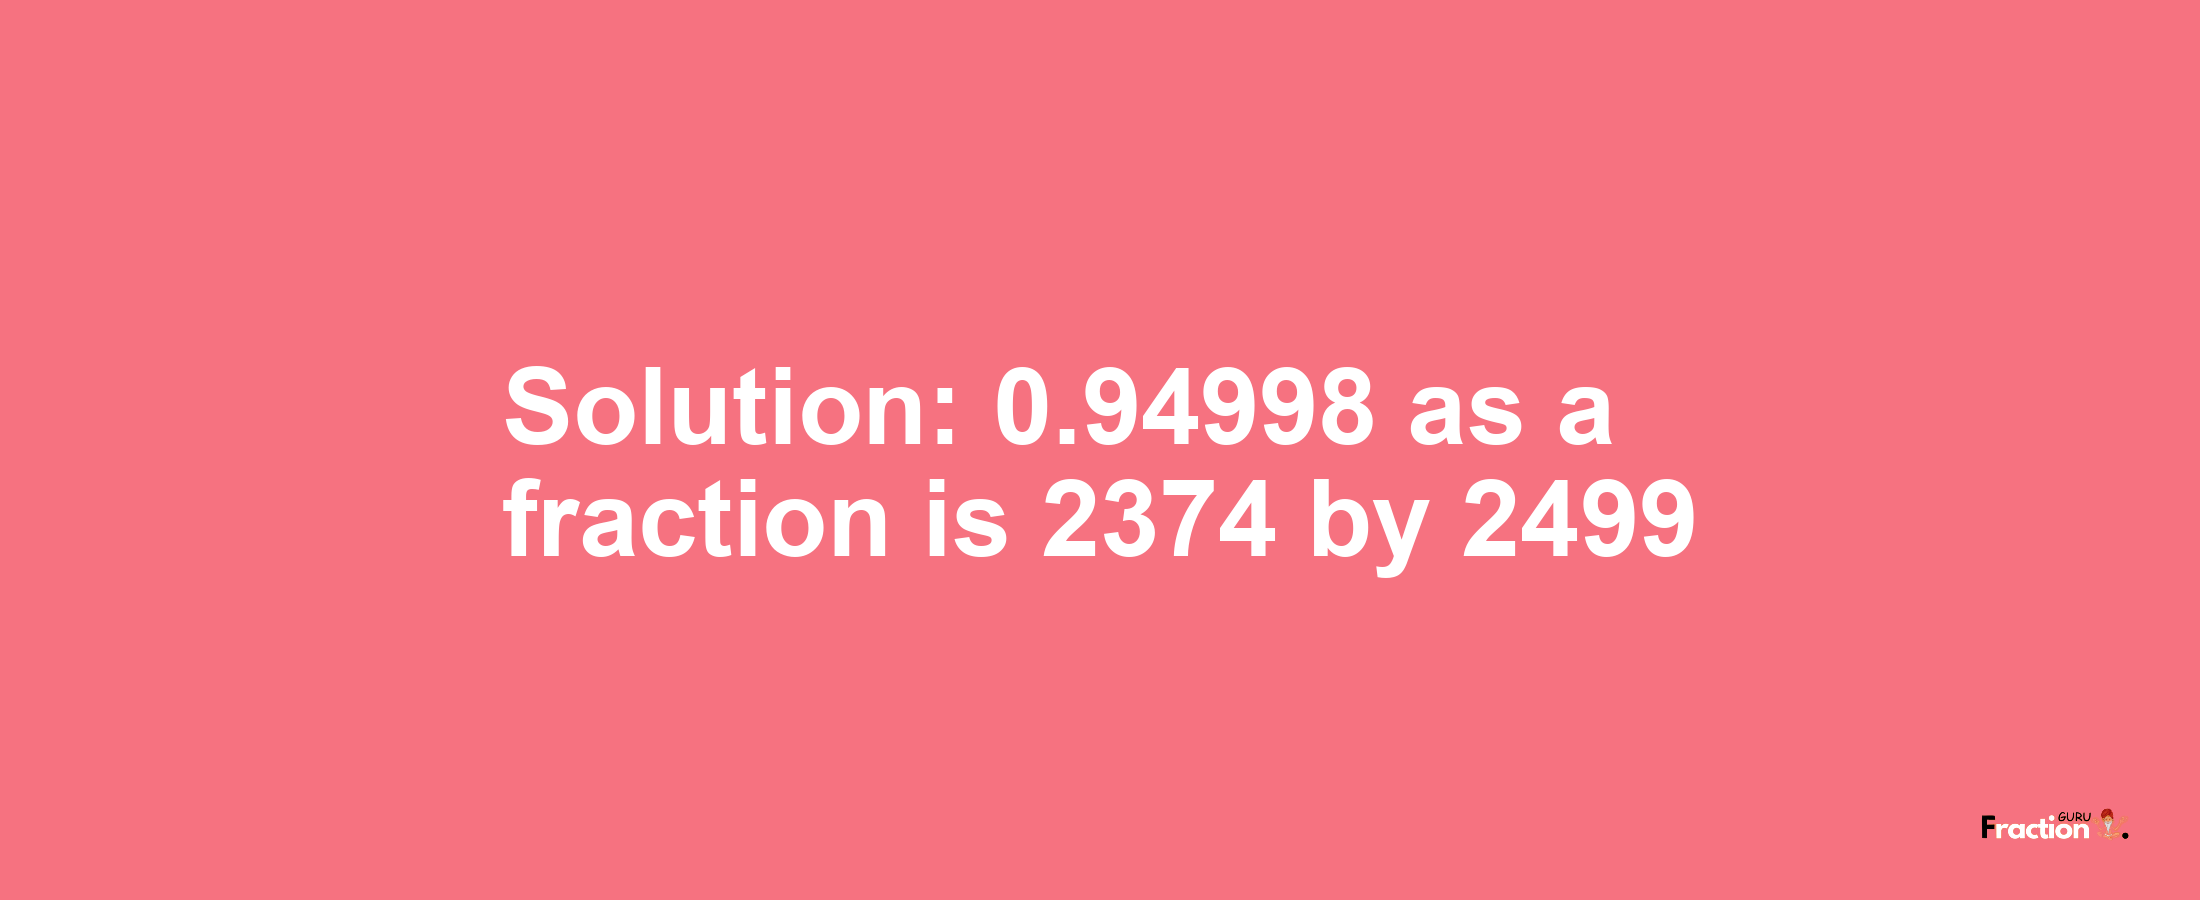 Solution:0.94998 as a fraction is 2374/2499